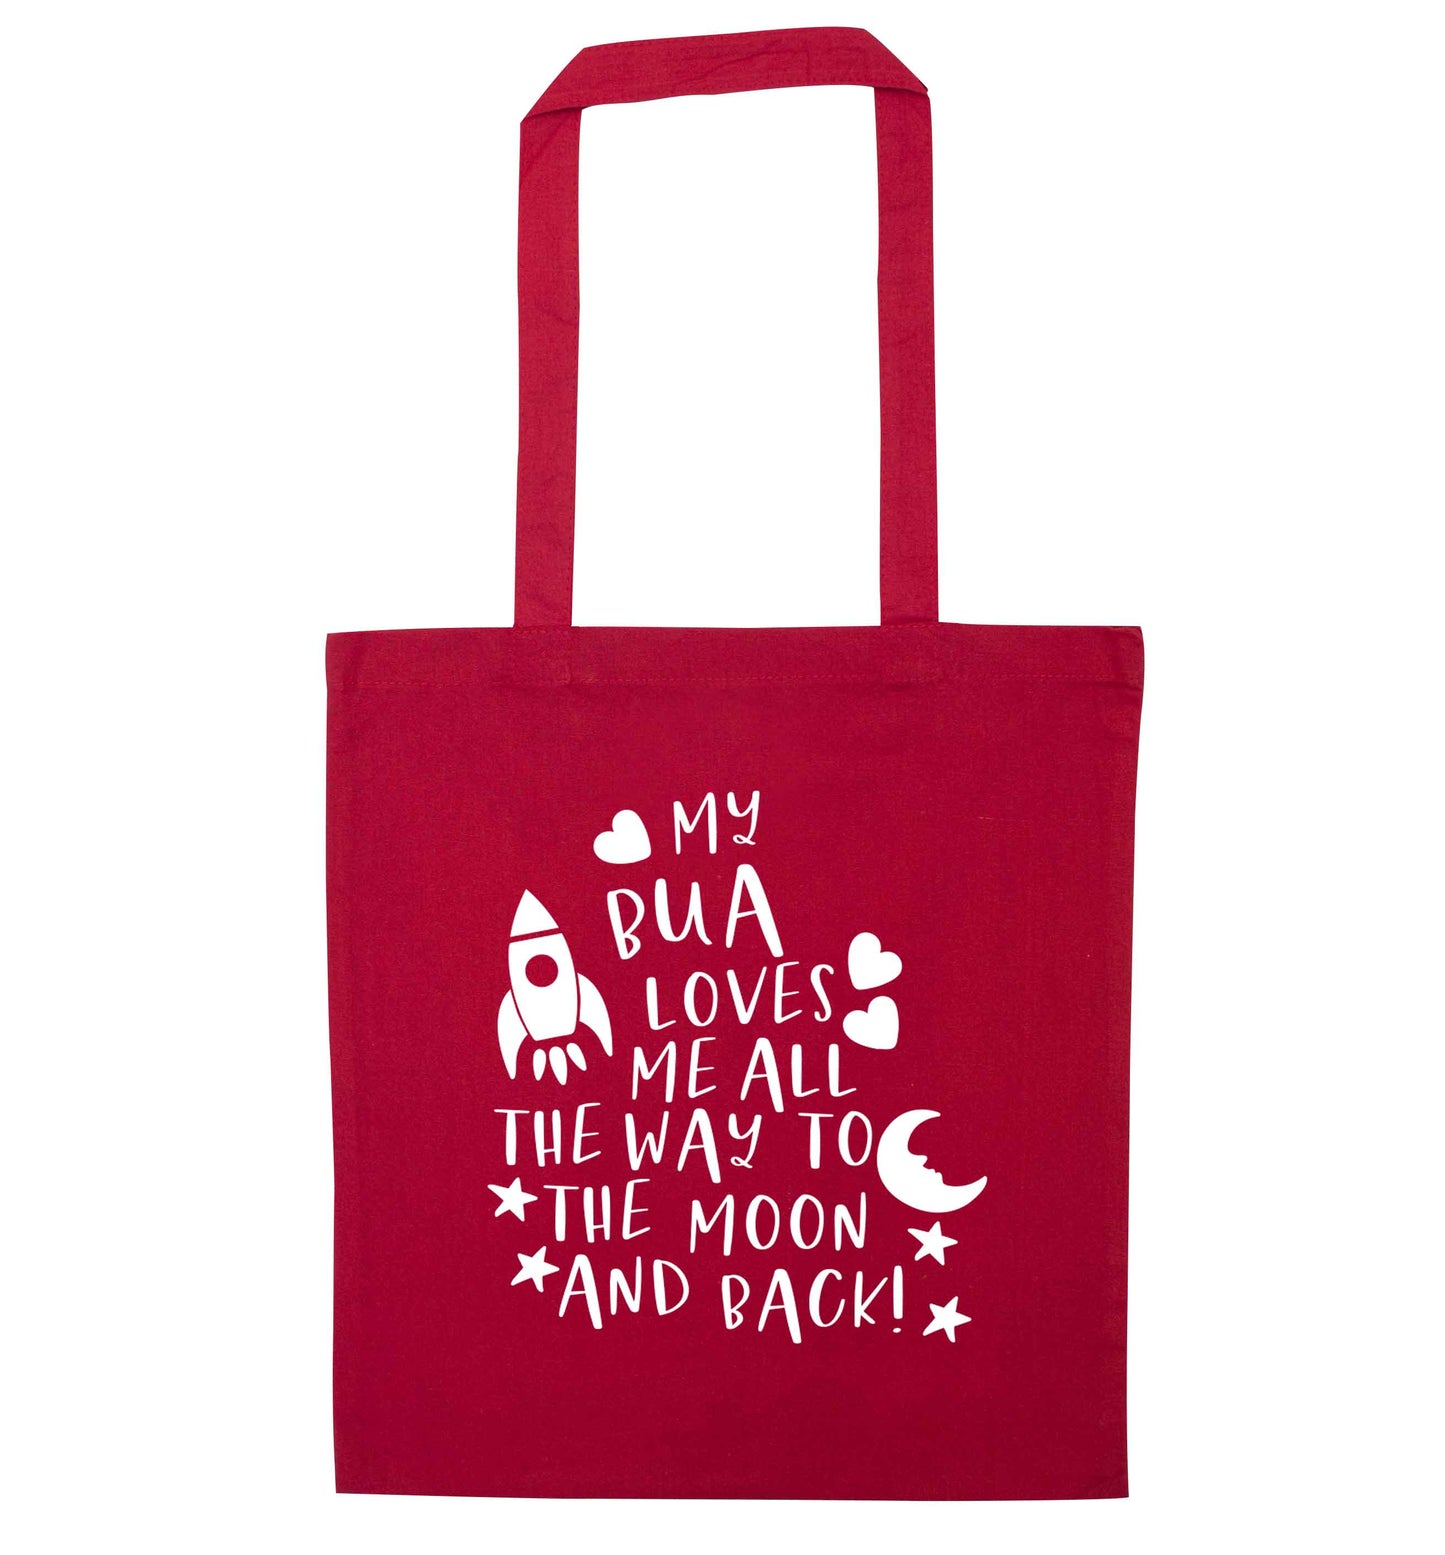 My bua loves me all they way to the moon and back red tote bag